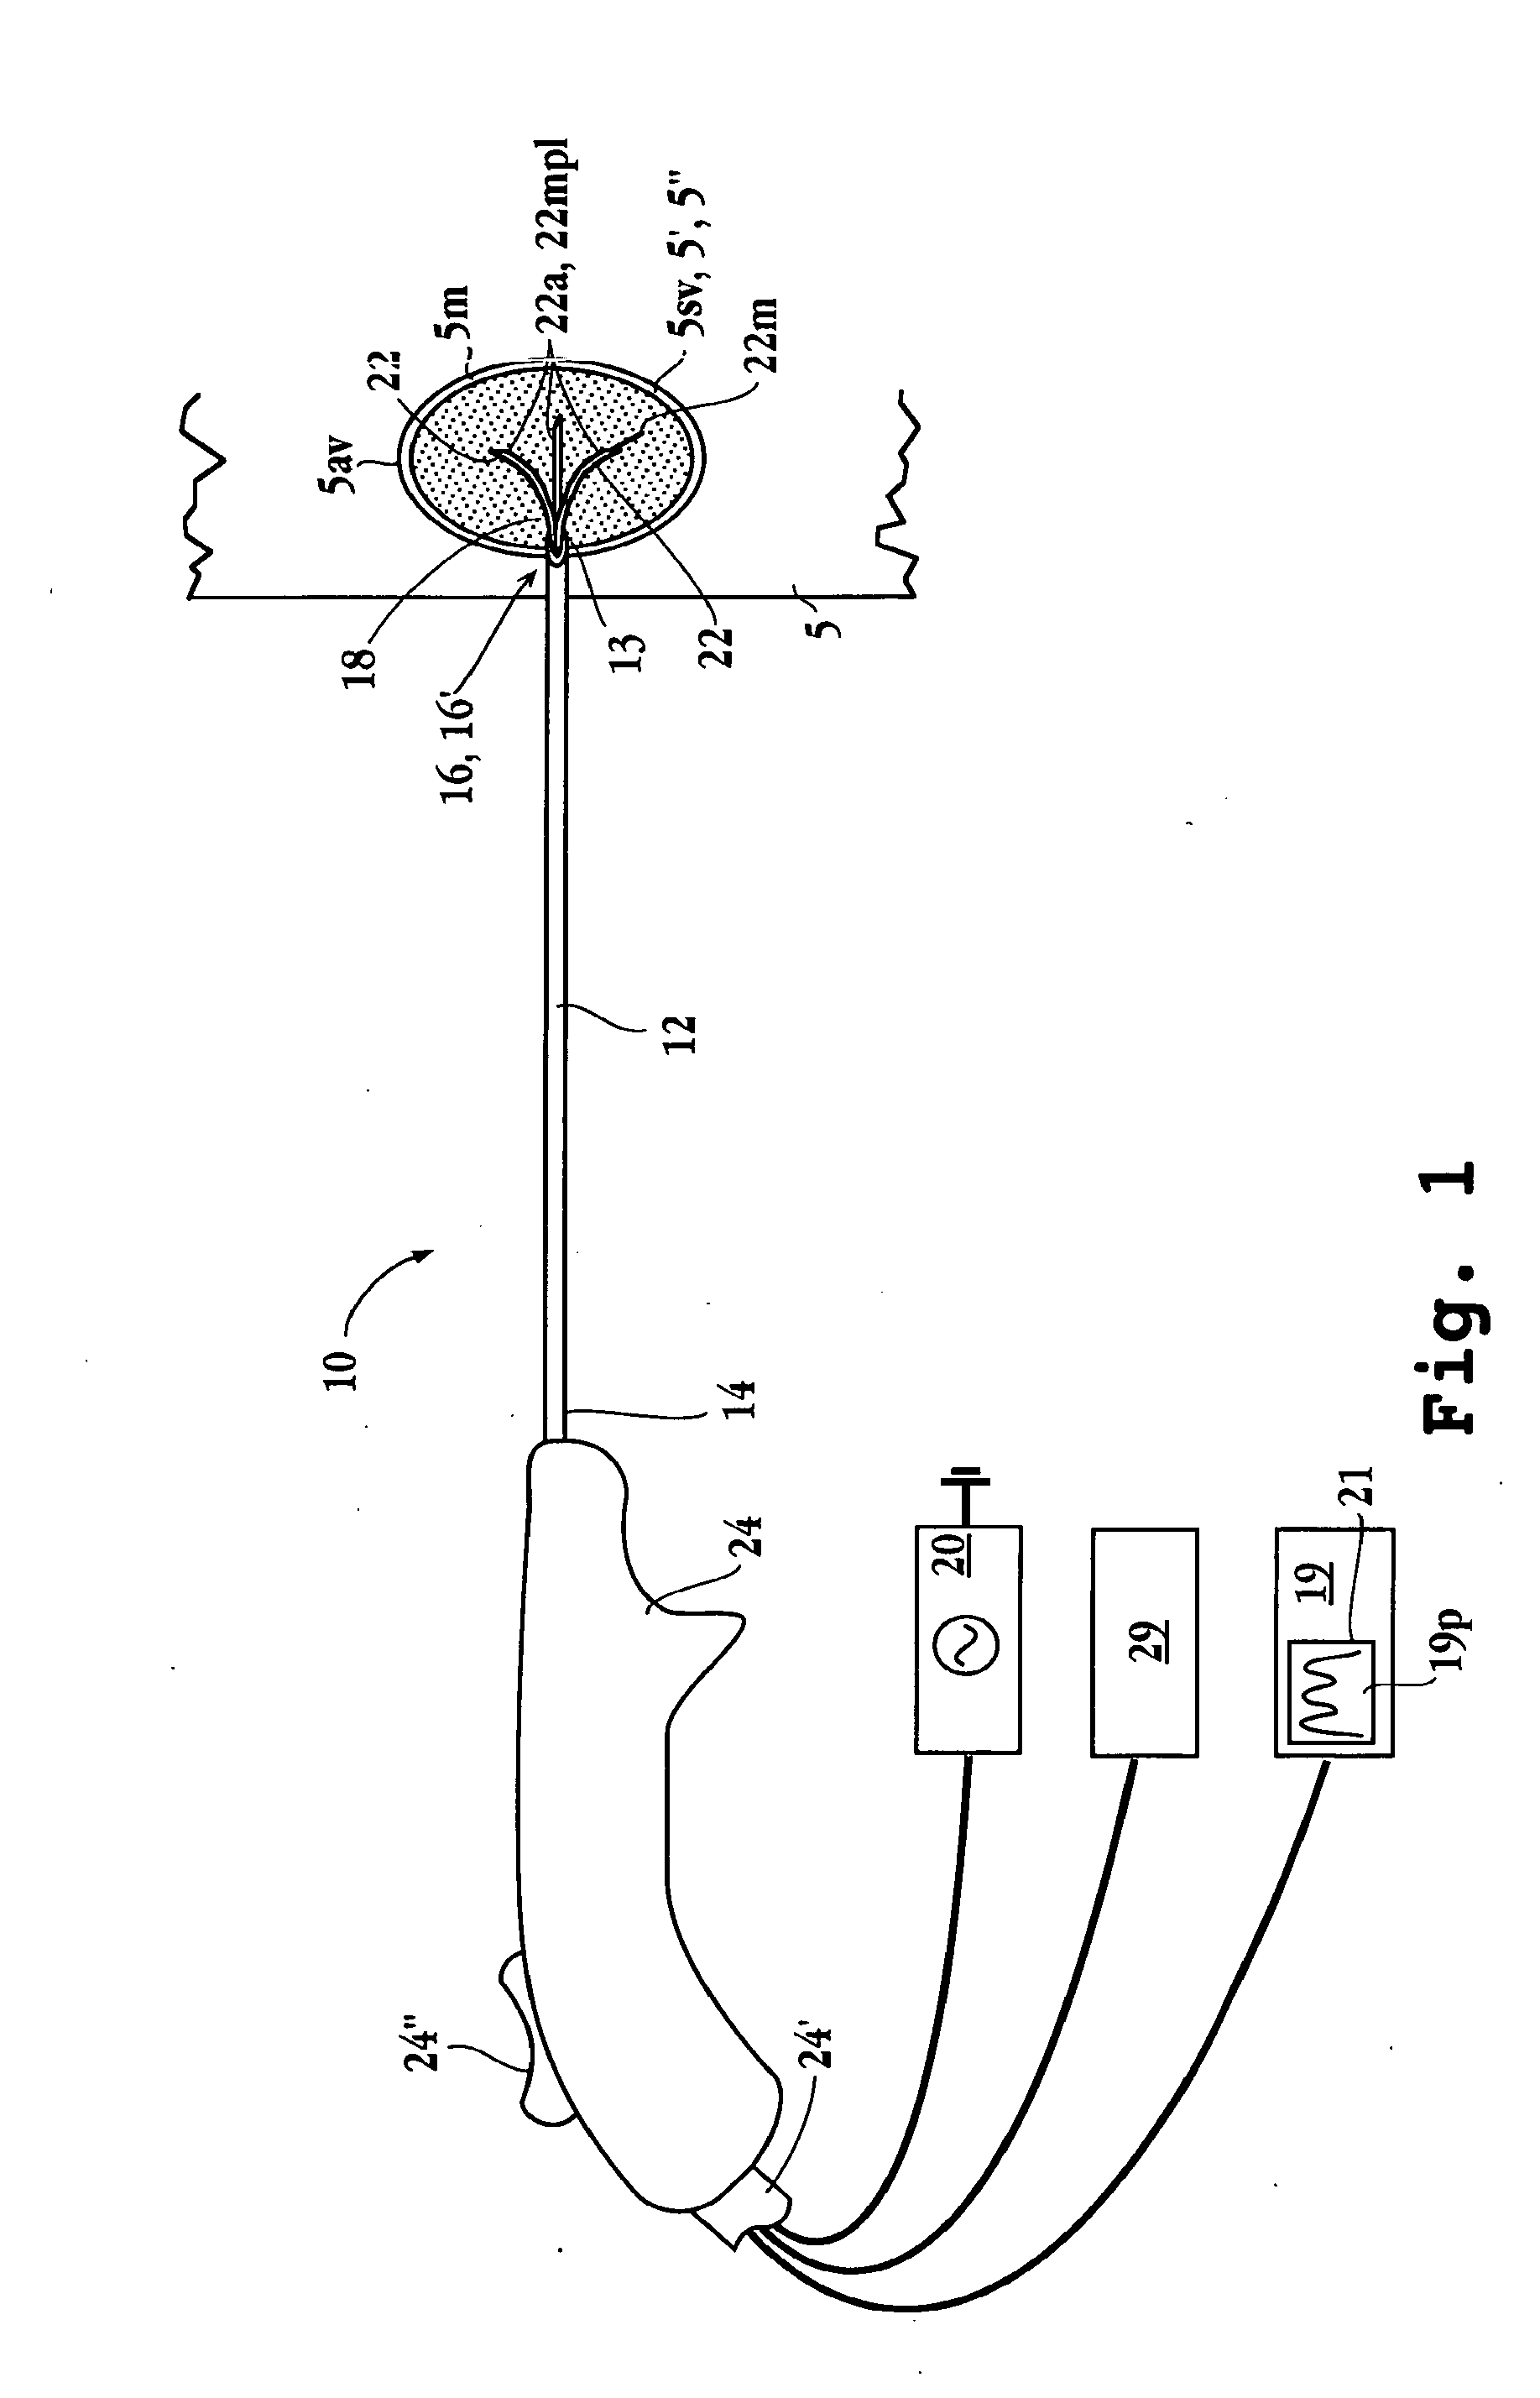 Tissue ablation apparatus and method